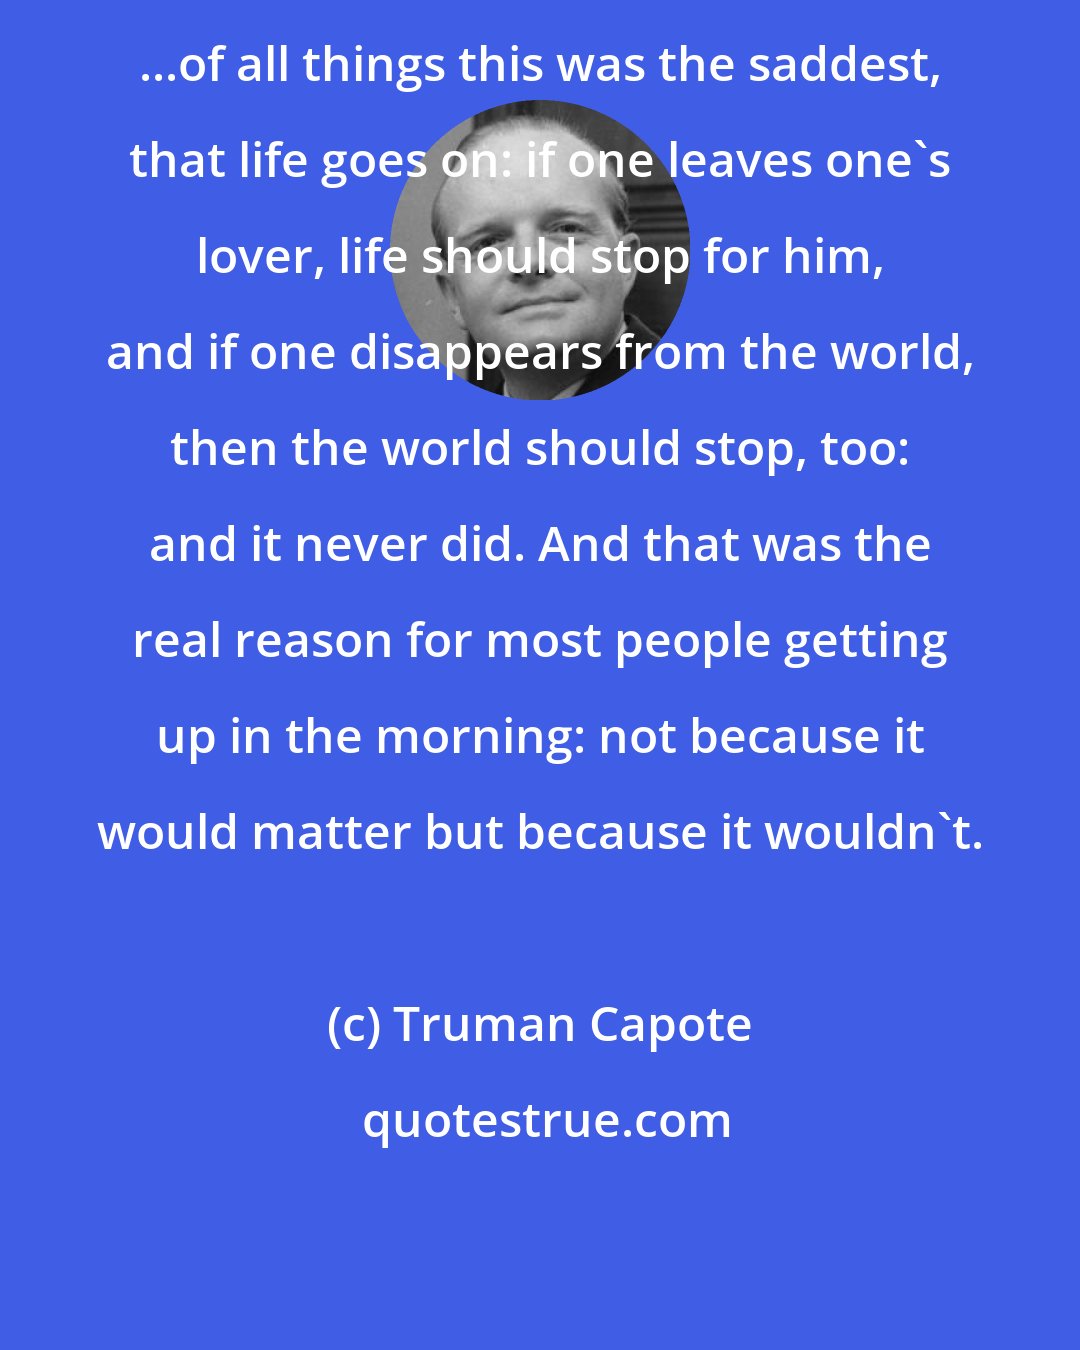 Truman Capote: ...of all things this was the saddest, that life goes on: if one leaves one's lover, life should stop for him, and if one disappears from the world, then the world should stop, too: and it never did. And that was the real reason for most people getting up in the morning: not because it would matter but because it wouldn't.